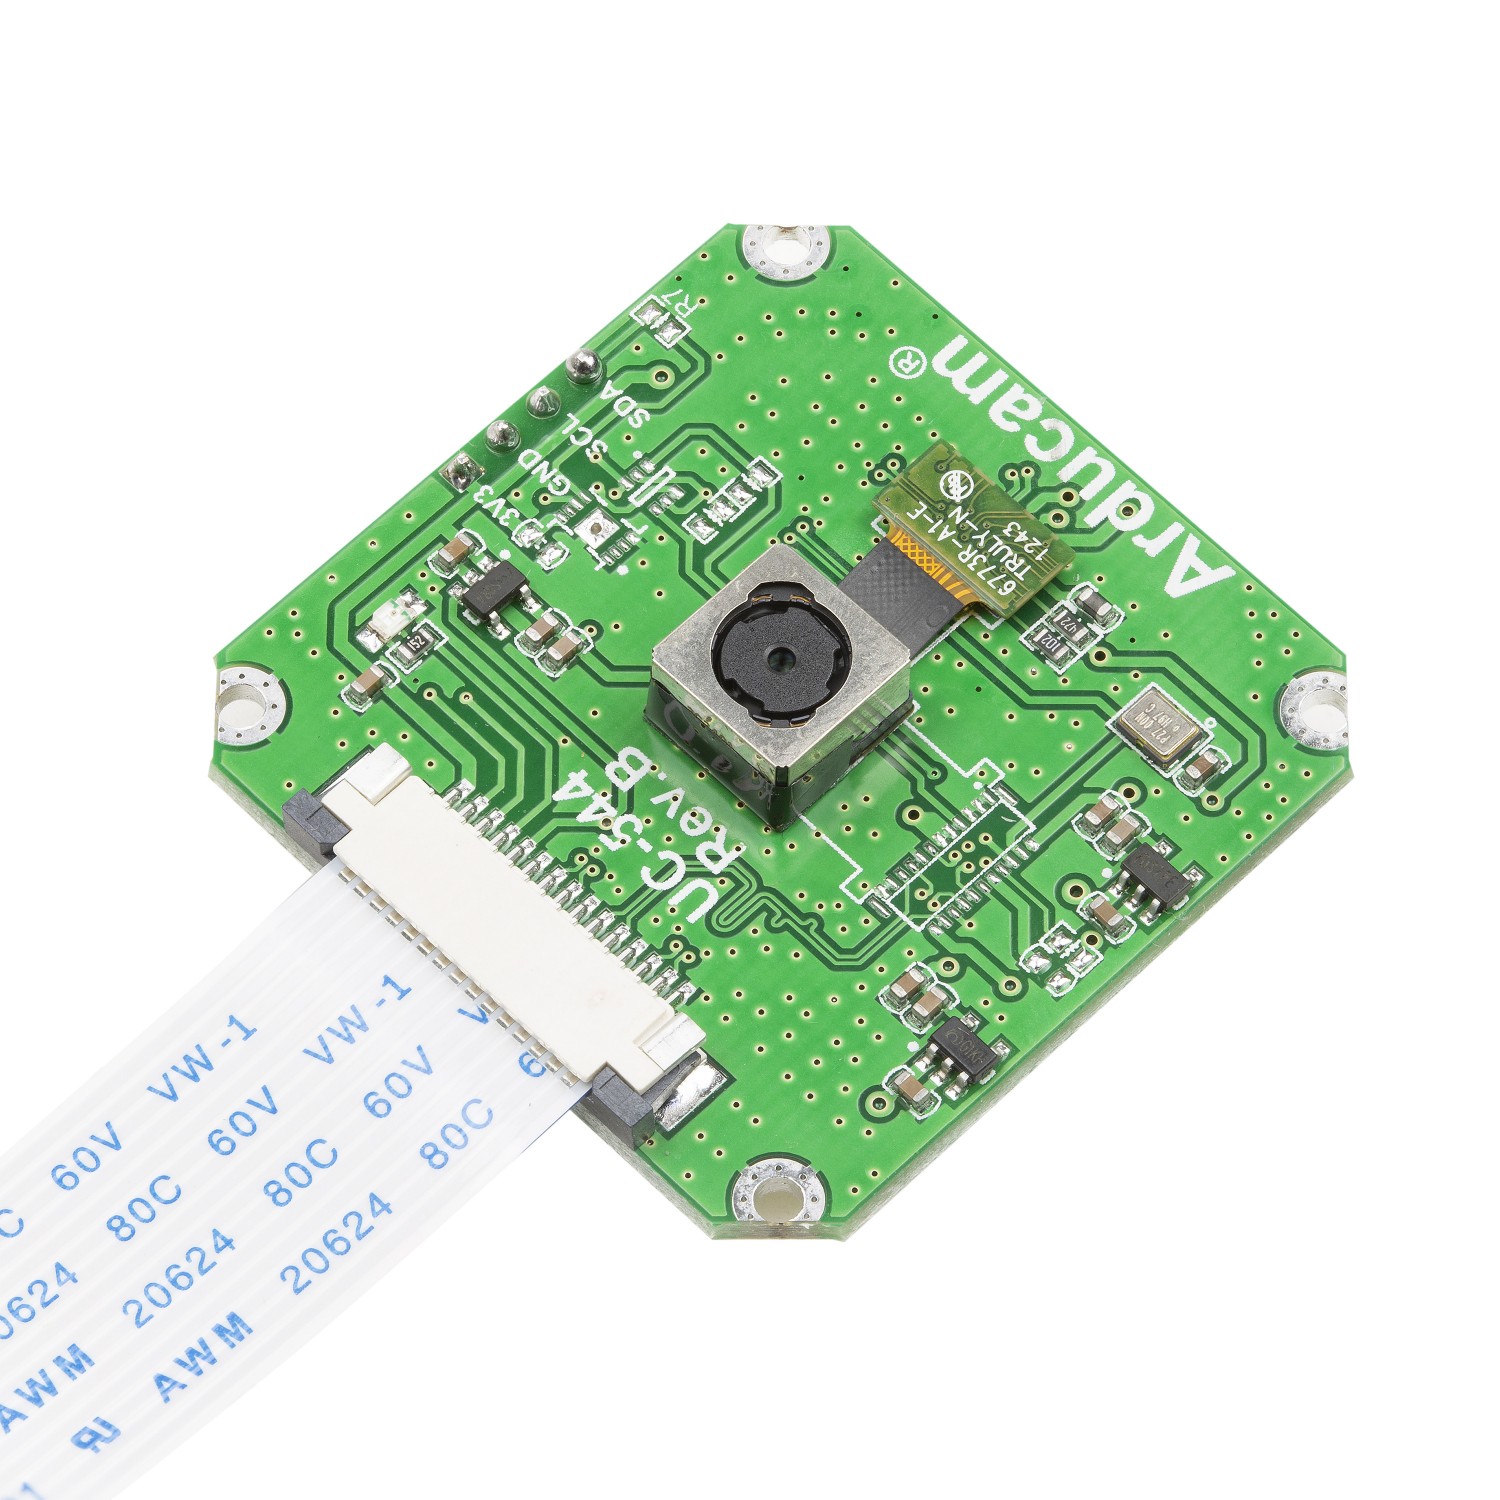 2 Pack AuviPal 5MP 1080p HD Raspberry Pi Camera Module with OV5647 Sensor and 6 inch 15 Pin Ribbon Cable